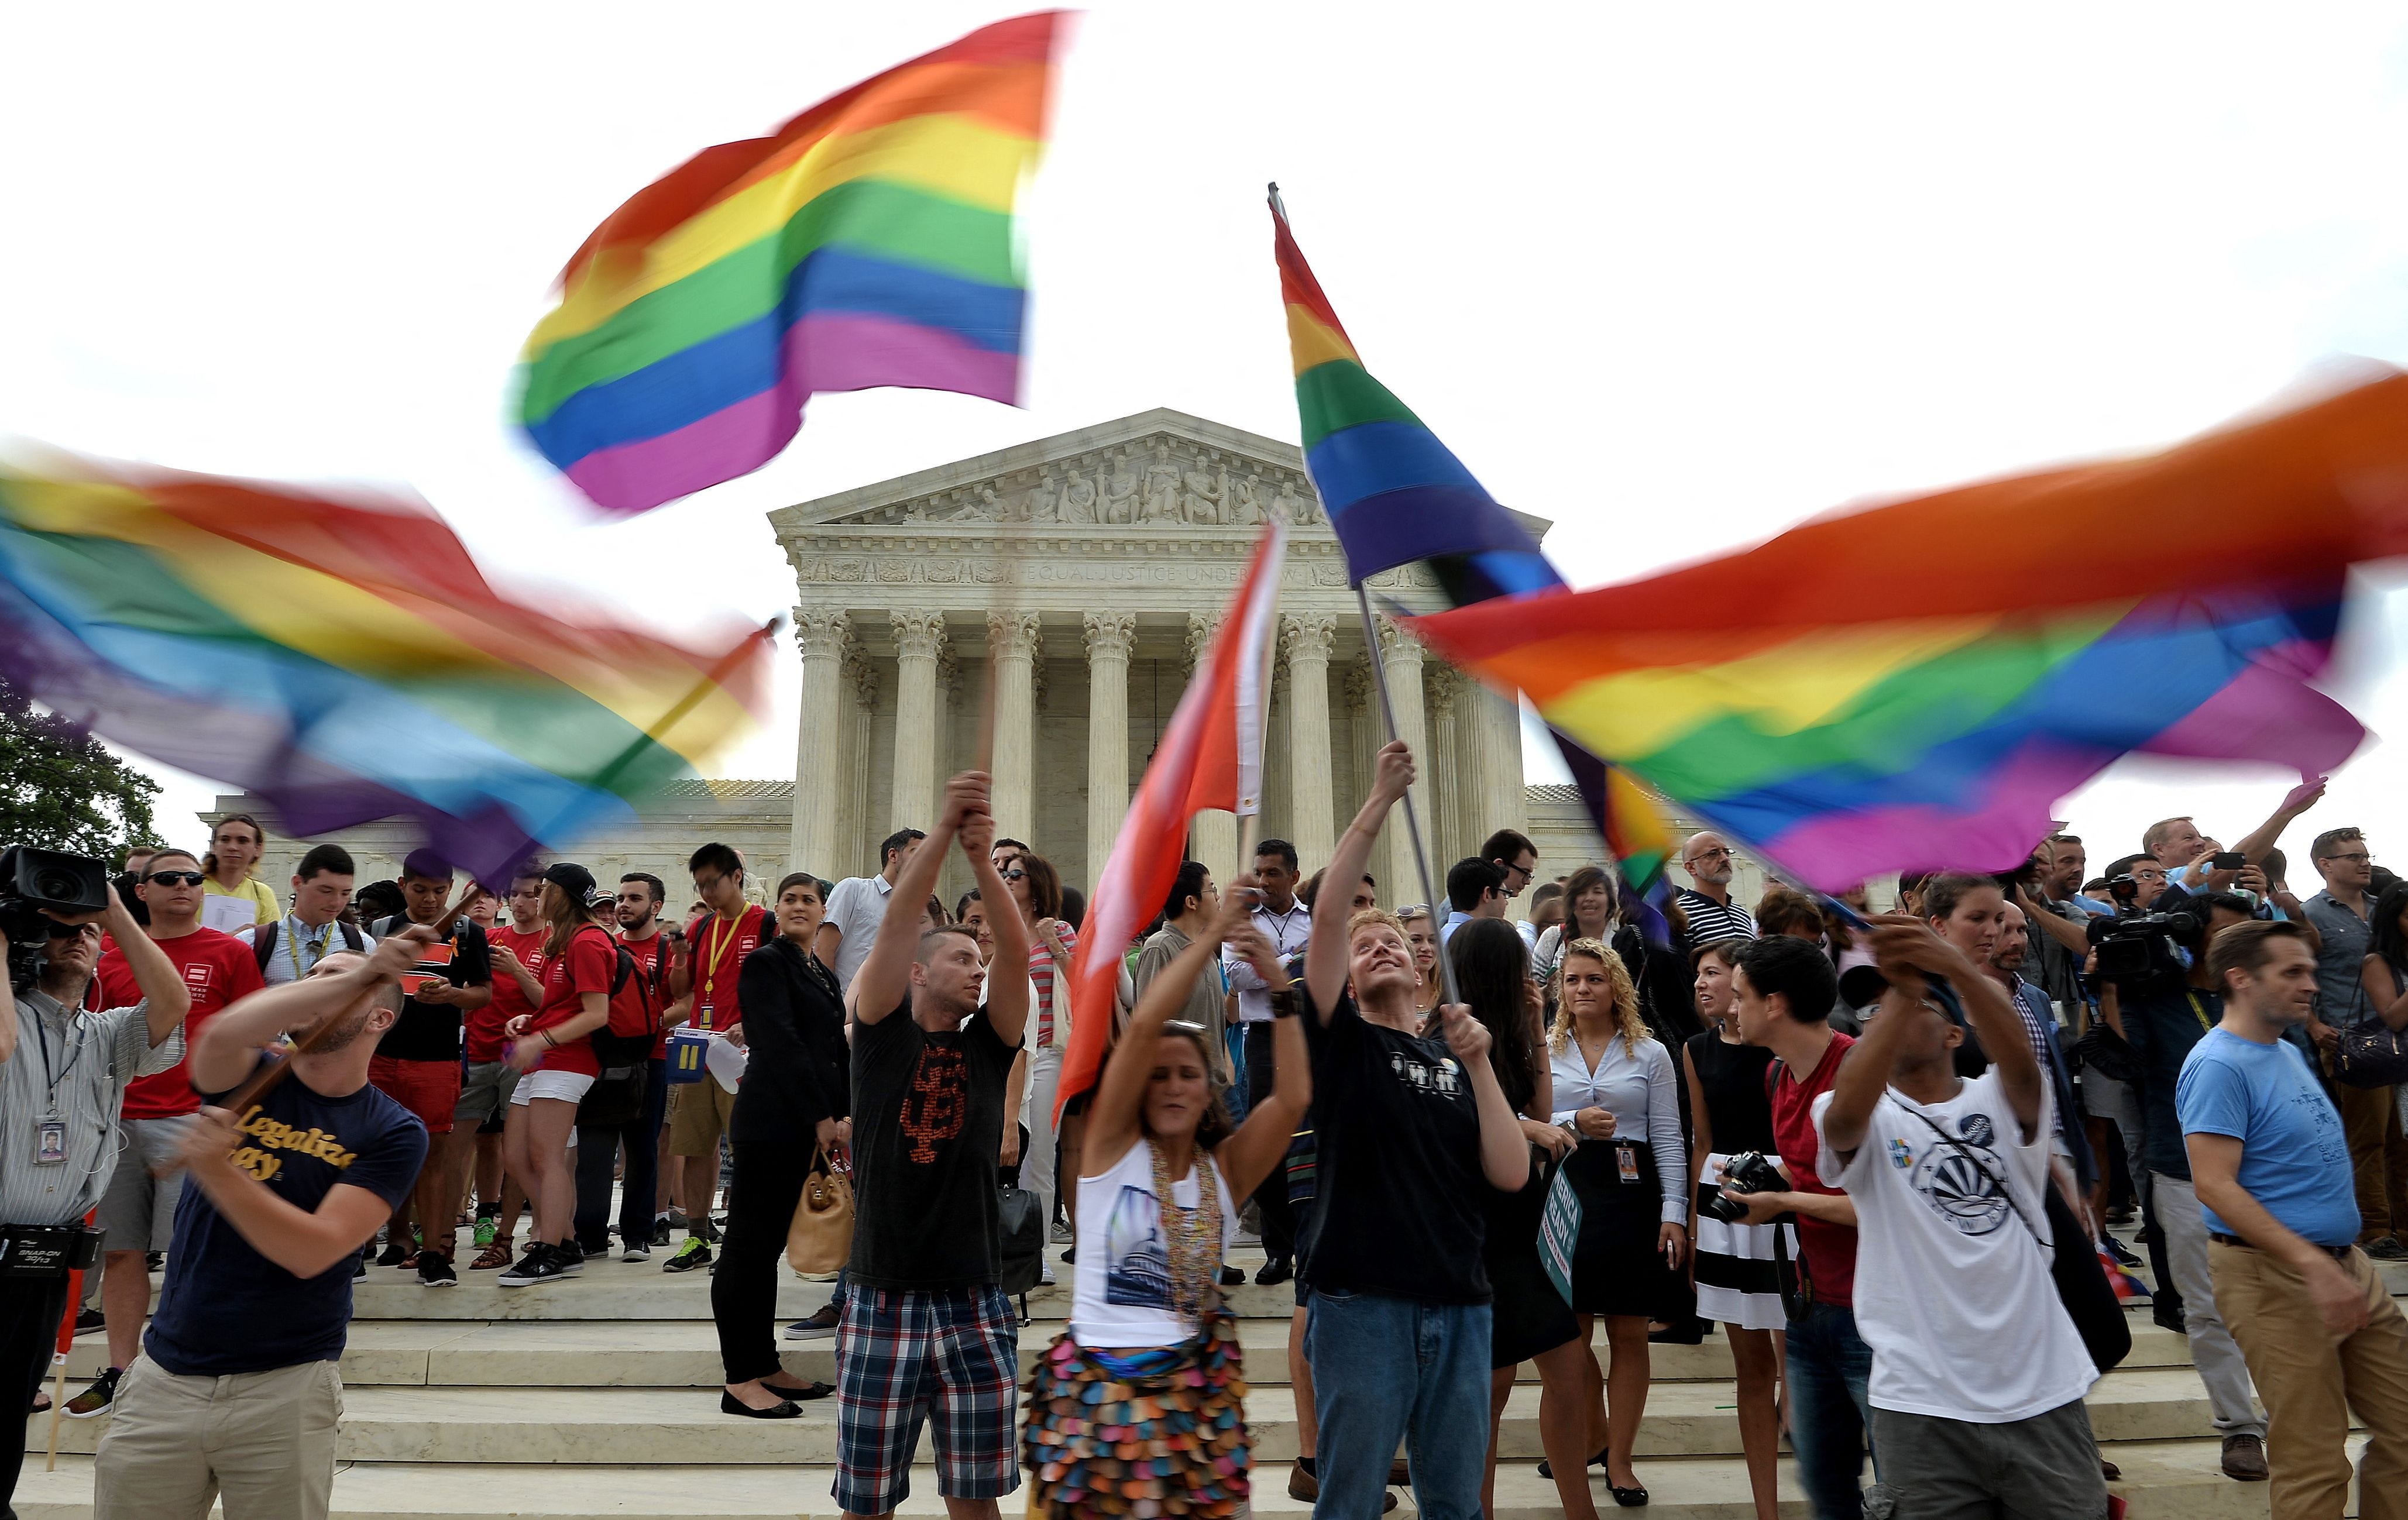 Supreme Court to debate whether businesses may decline to provide services to same-sex weddings